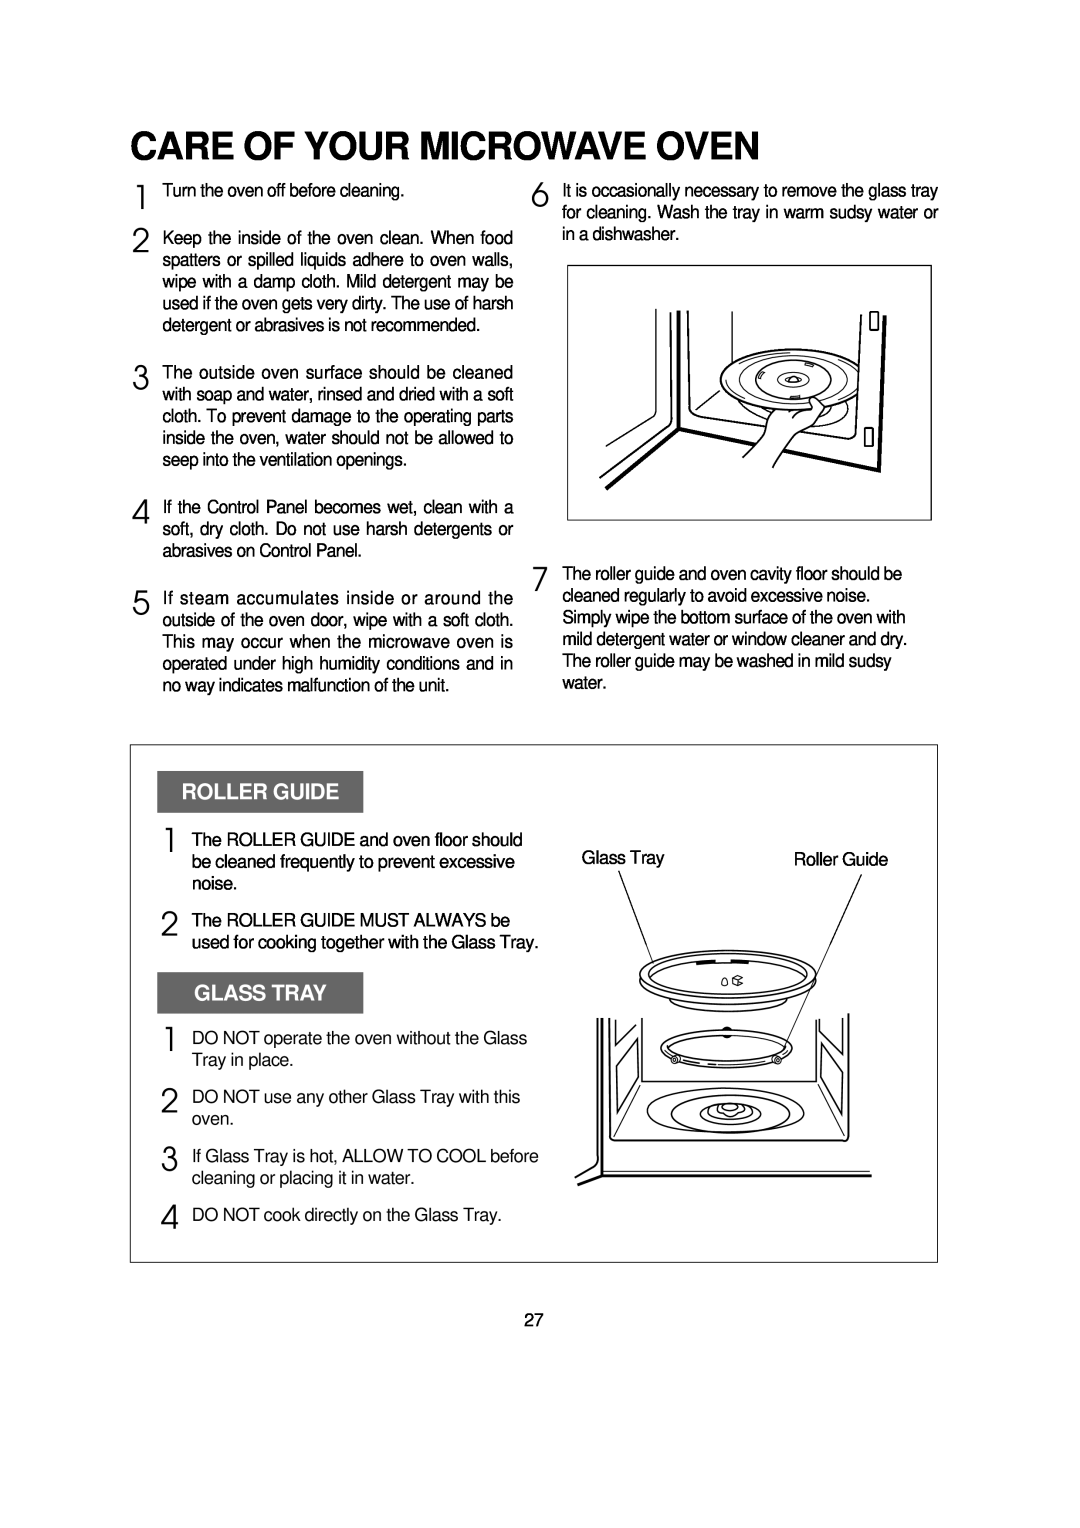 Magic Chef MCD990ARS instruction manual Care Of Your Microwave Oven, Roller Guide, Glass Tray 